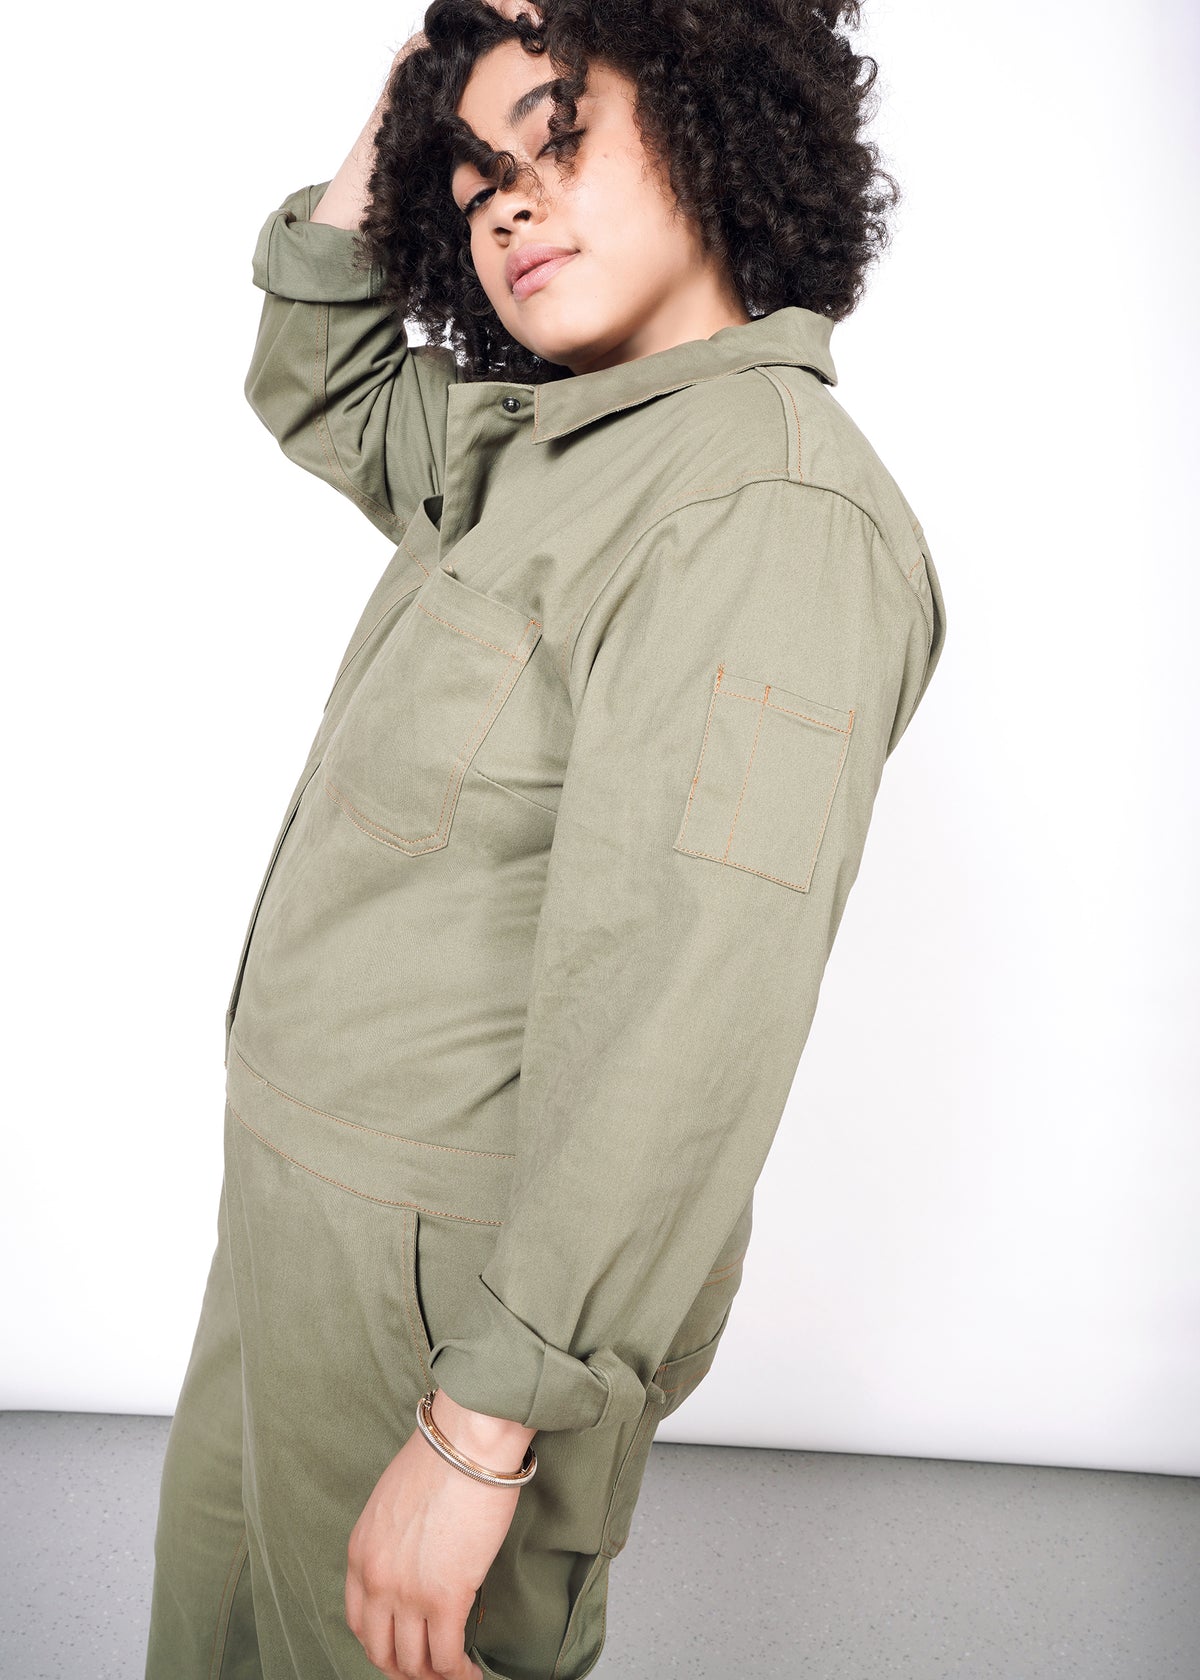 Profile view of curly haired model wearing olive long sleeve coveralls, showing the pocked and orange stitching on sleeve